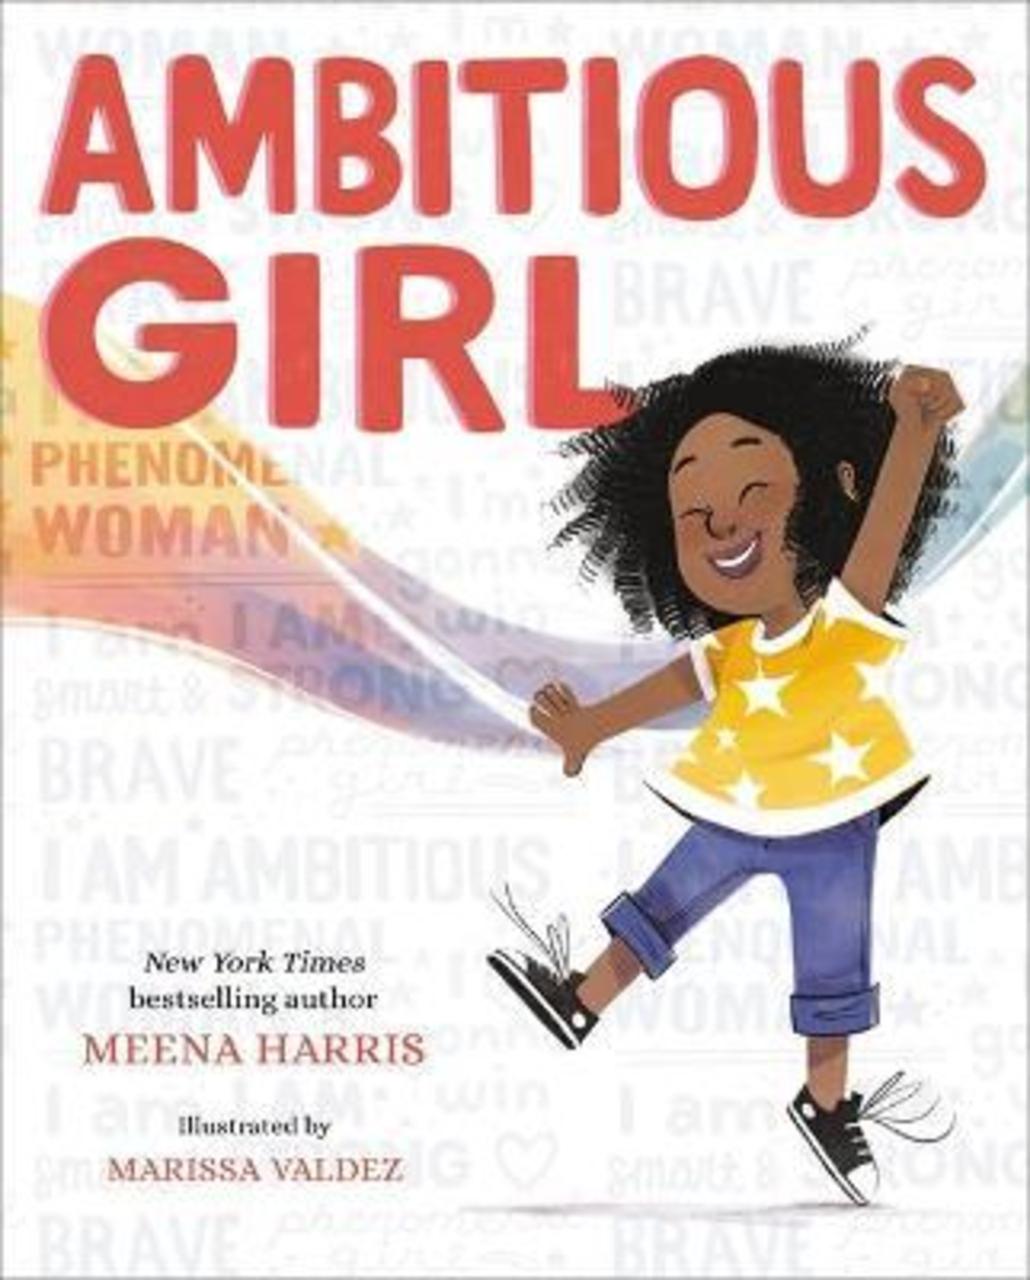 Sách - Ambitious Girl by Meena Harris (US edition, hardcover)